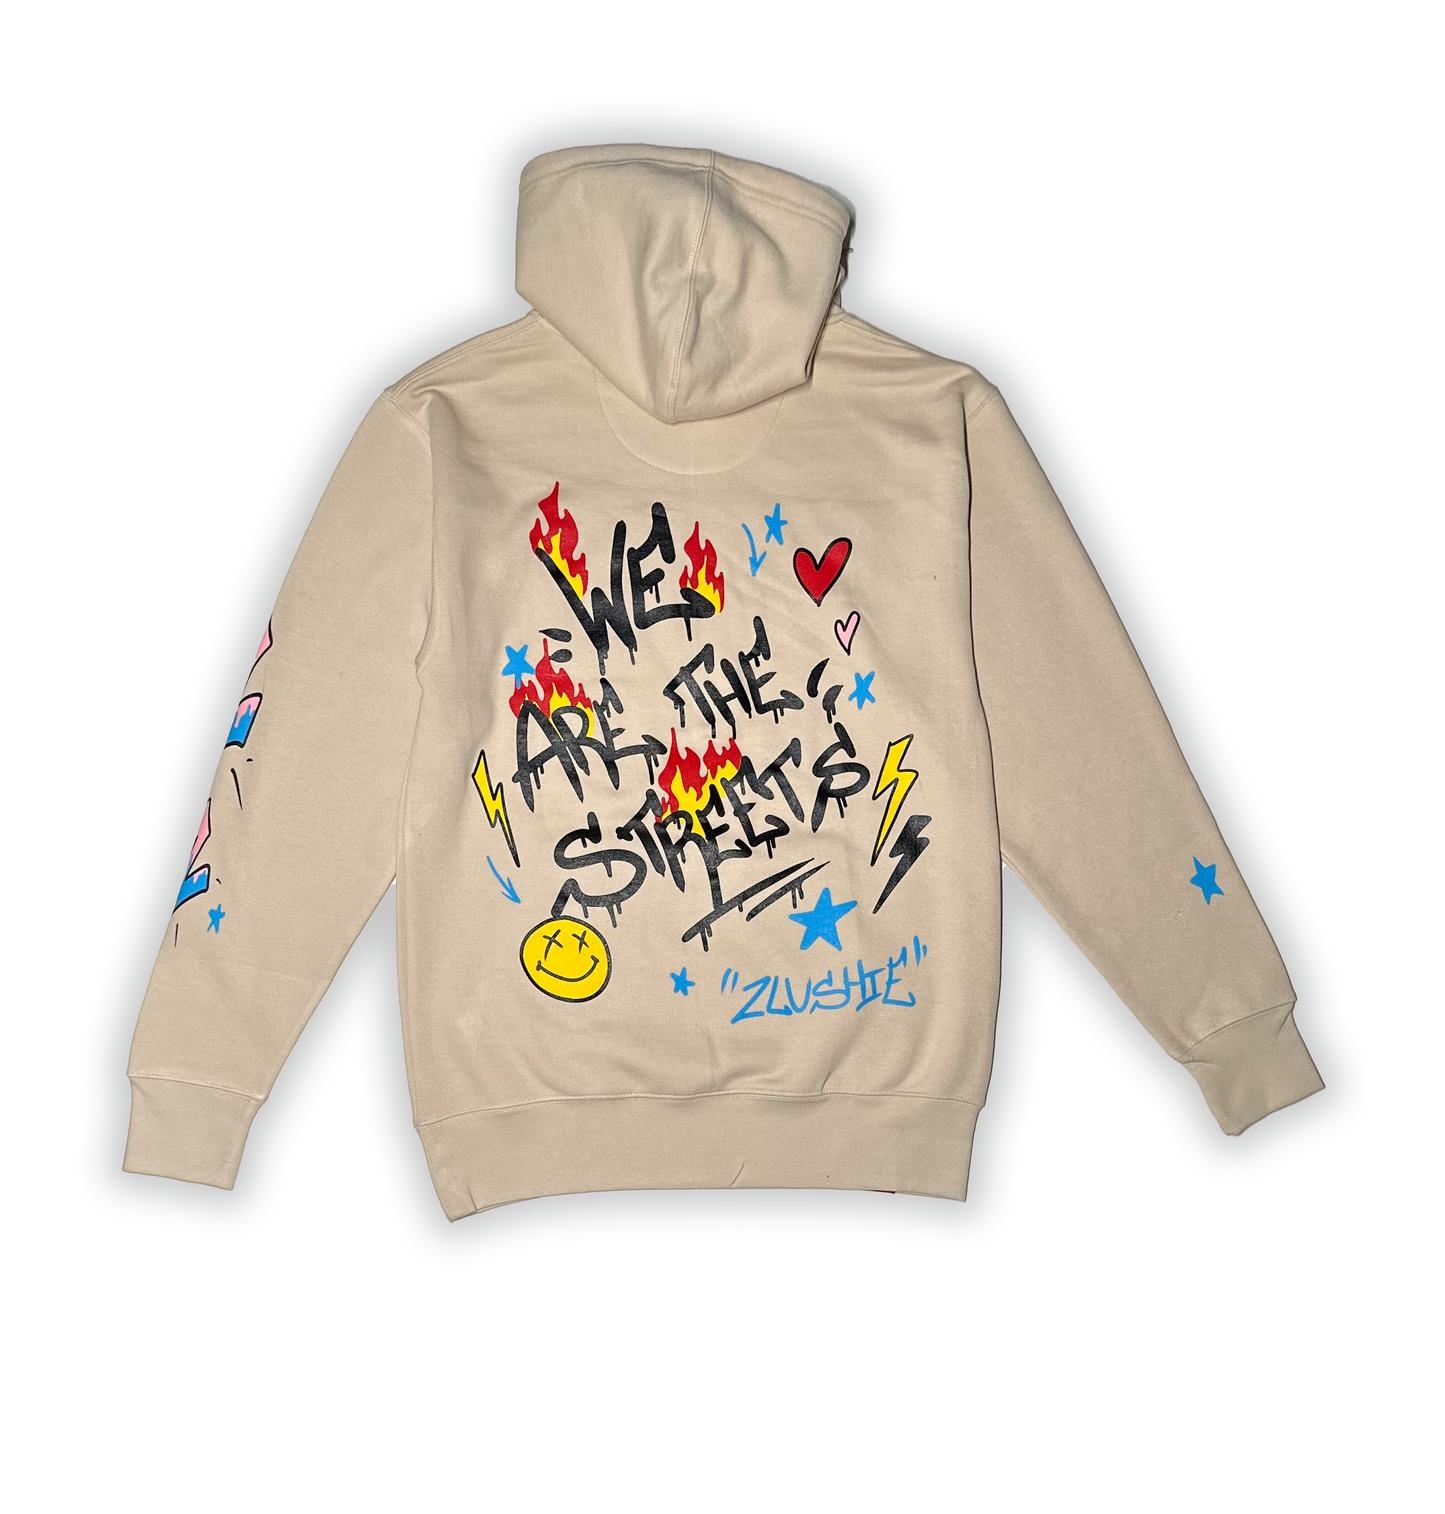 ''We are the Streets'' Hoodies